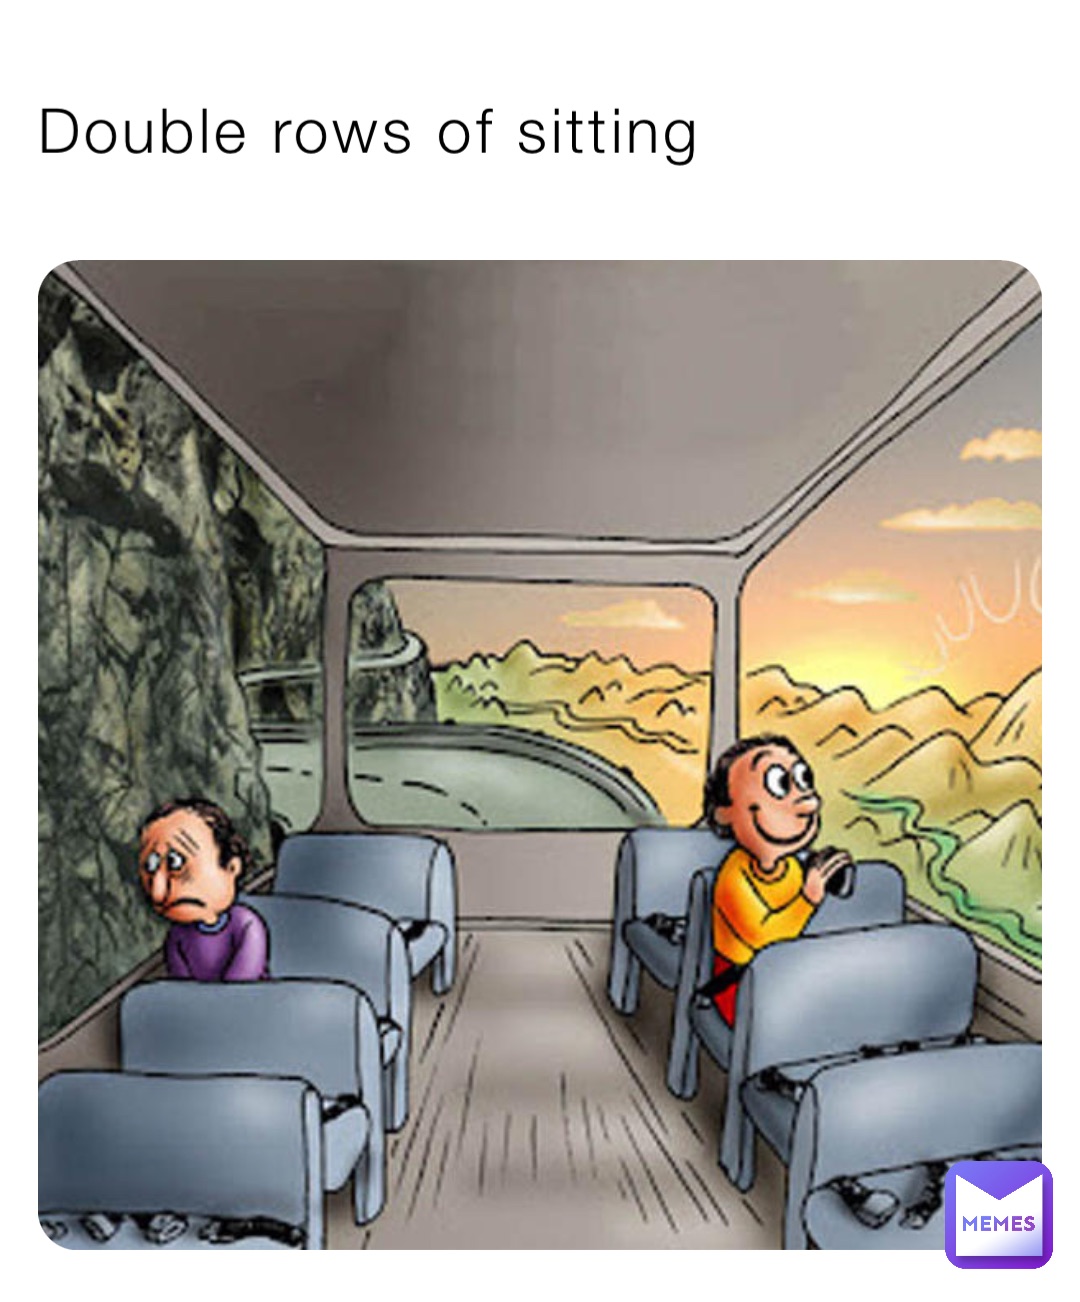 Double rows of sitting